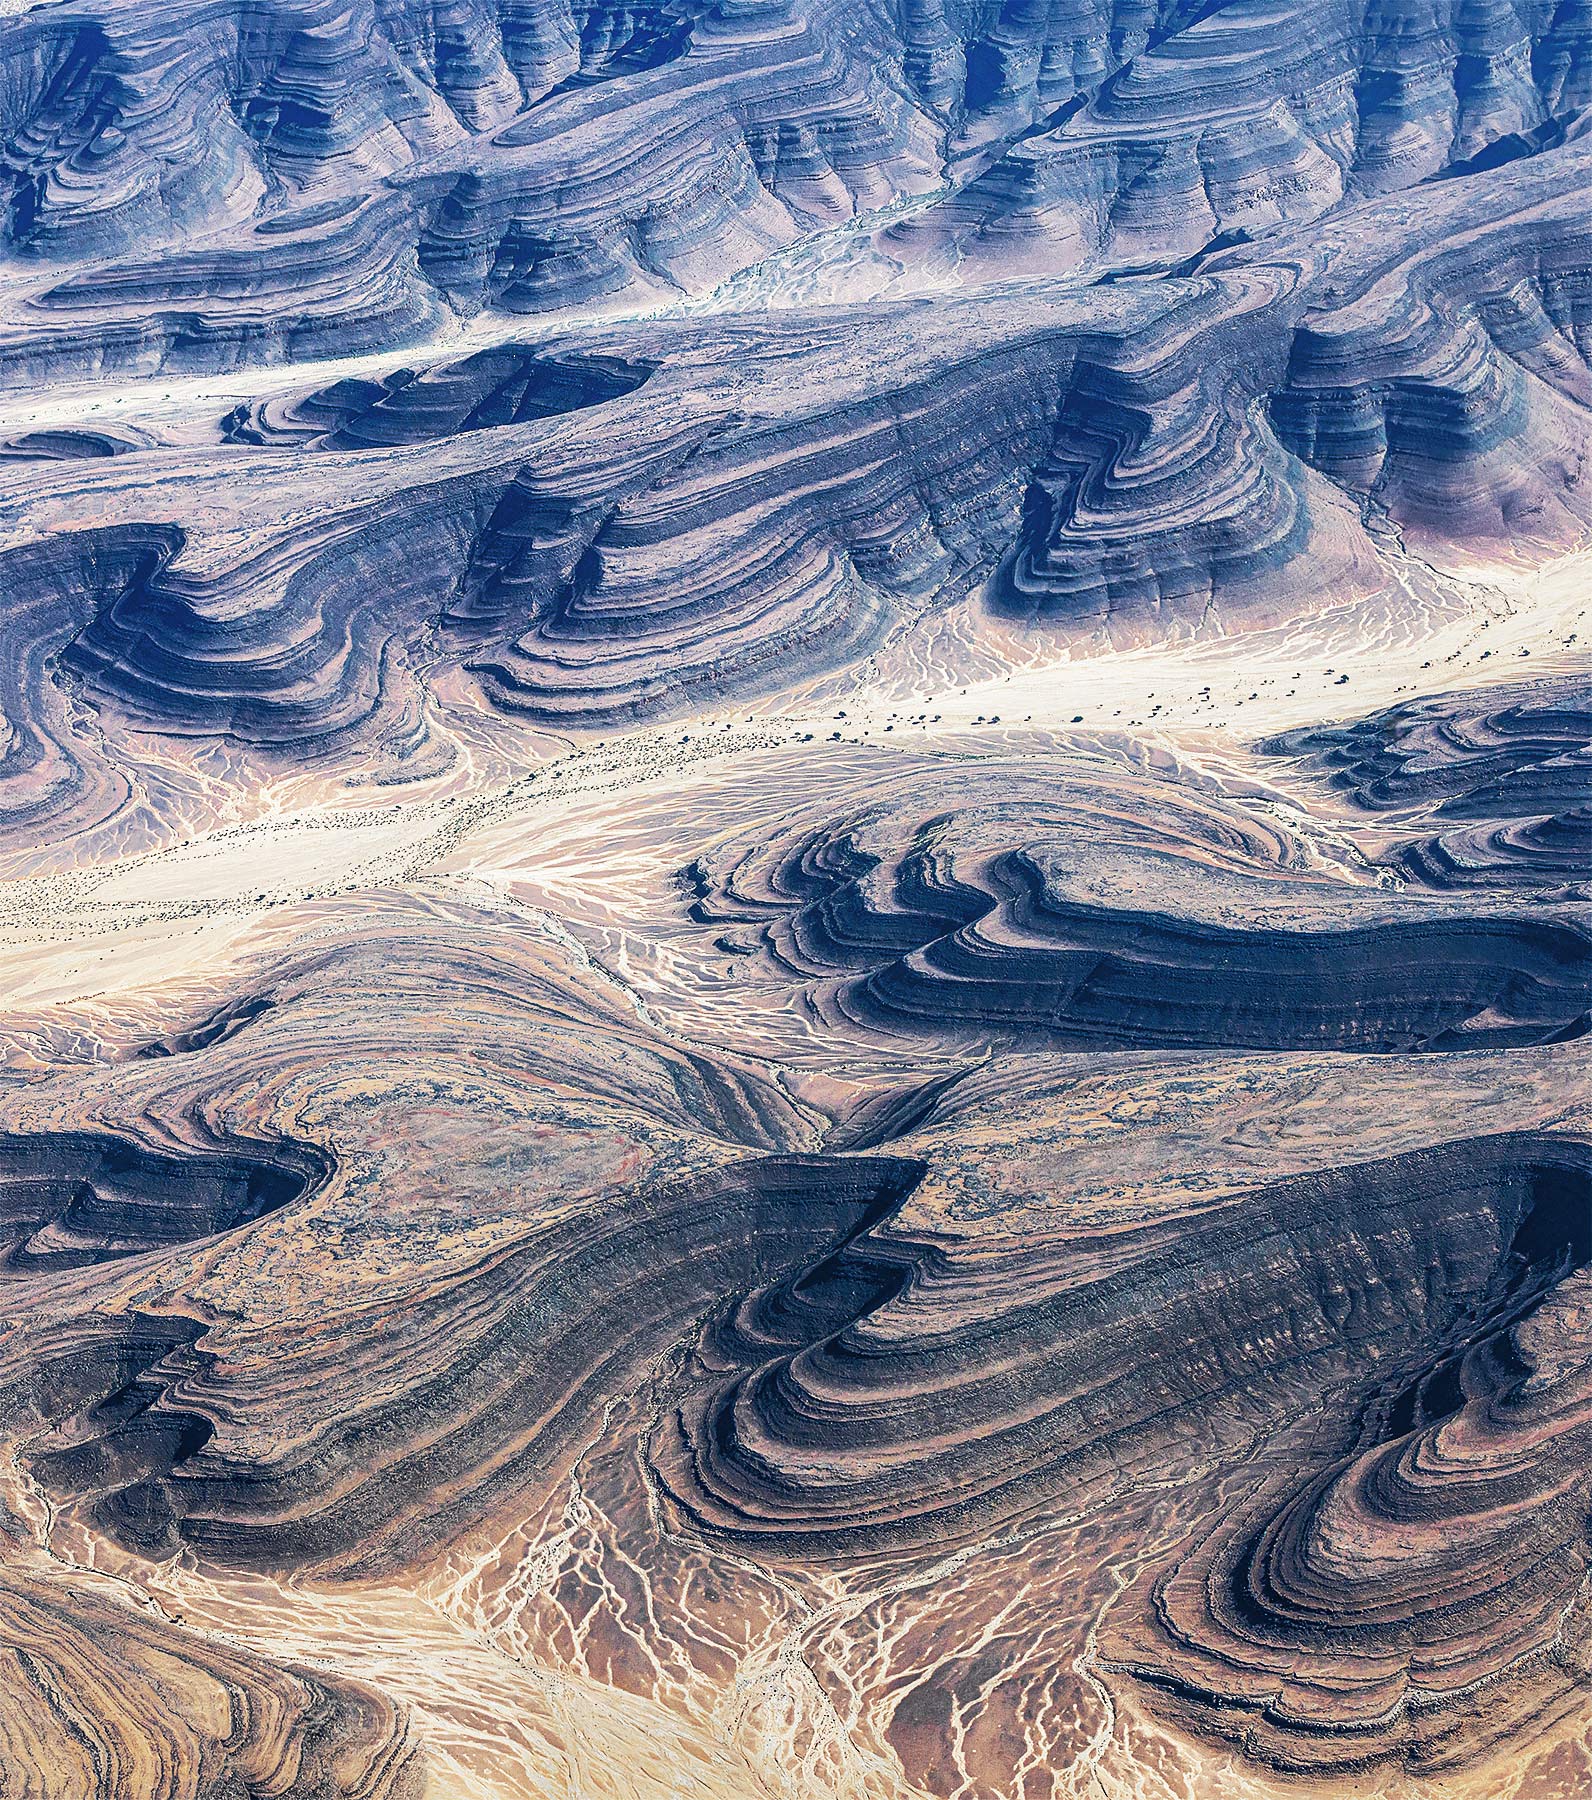 A million canyons and washes through terraced desert above southern Namibia